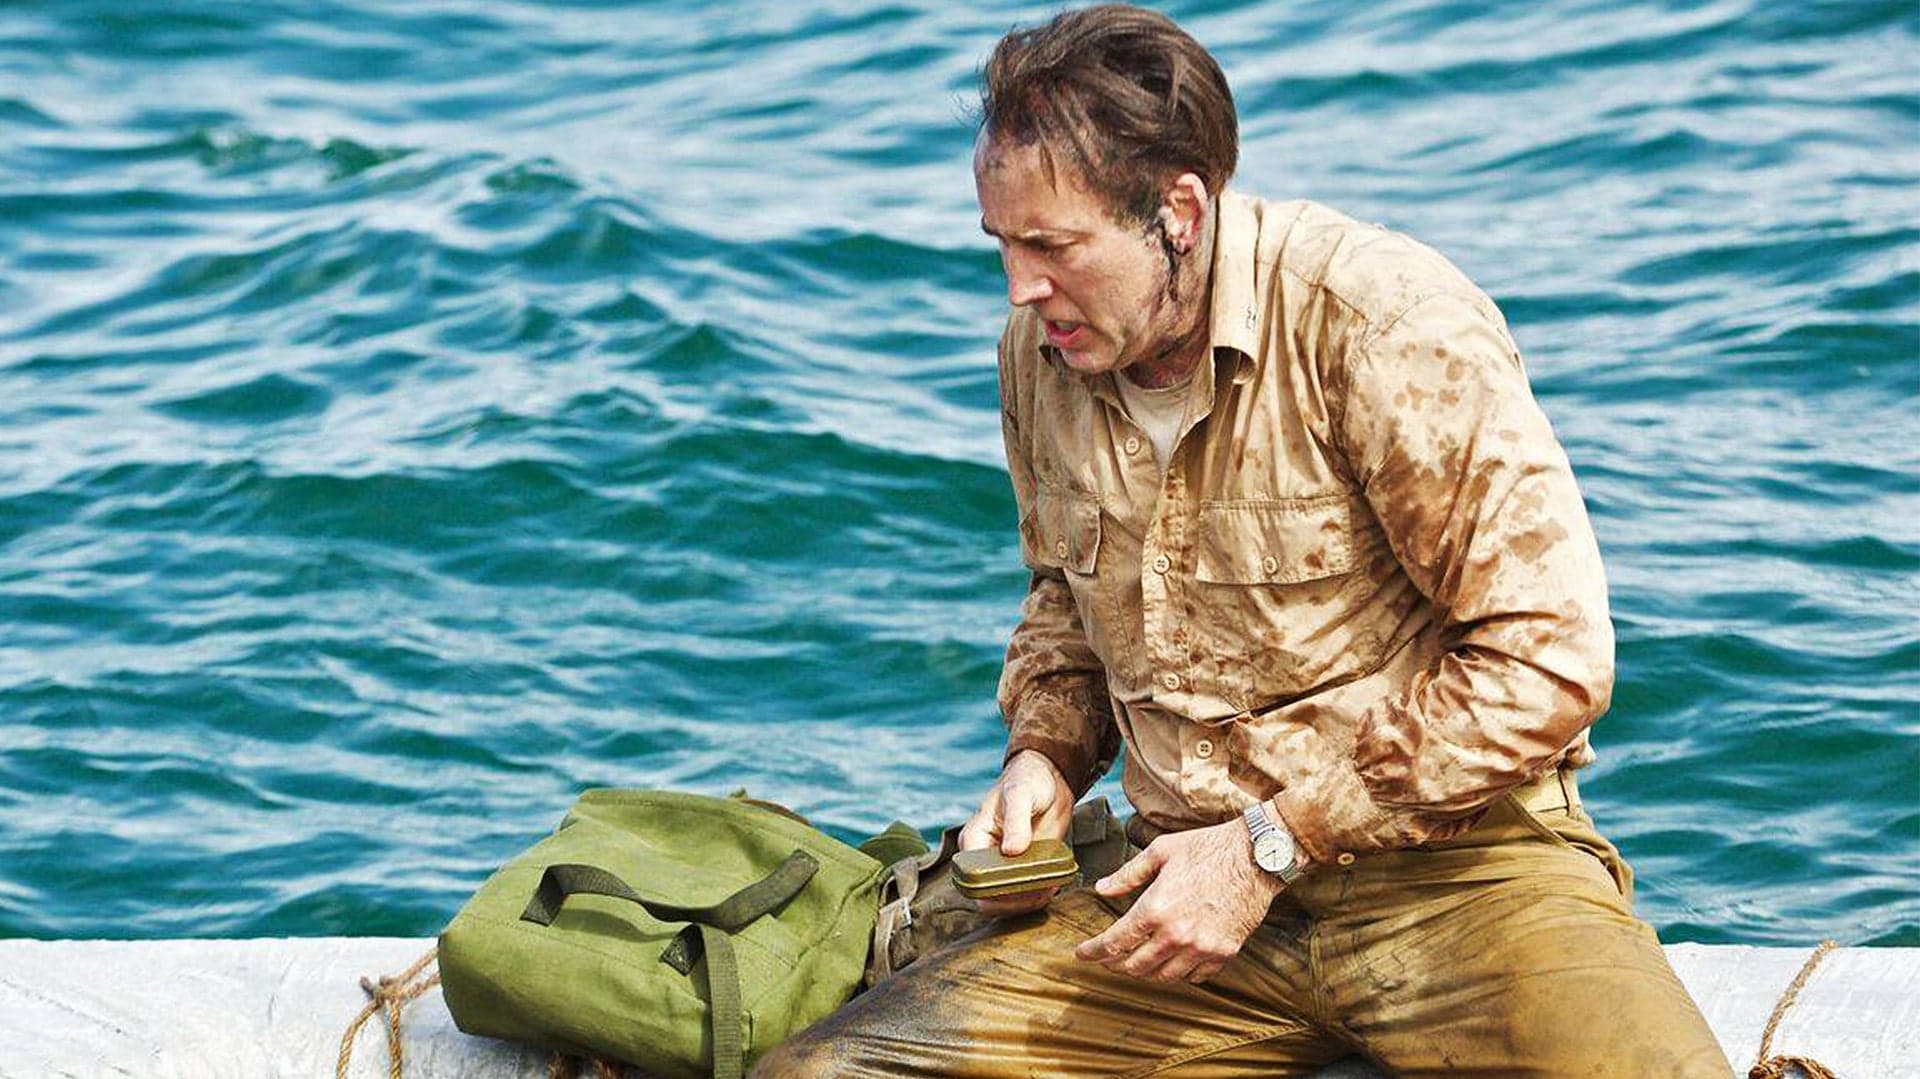 This Nic Cage Film Based On The USS Indianapolis Disaster Doesn’t Look That Horrible—Or Maybe It Does